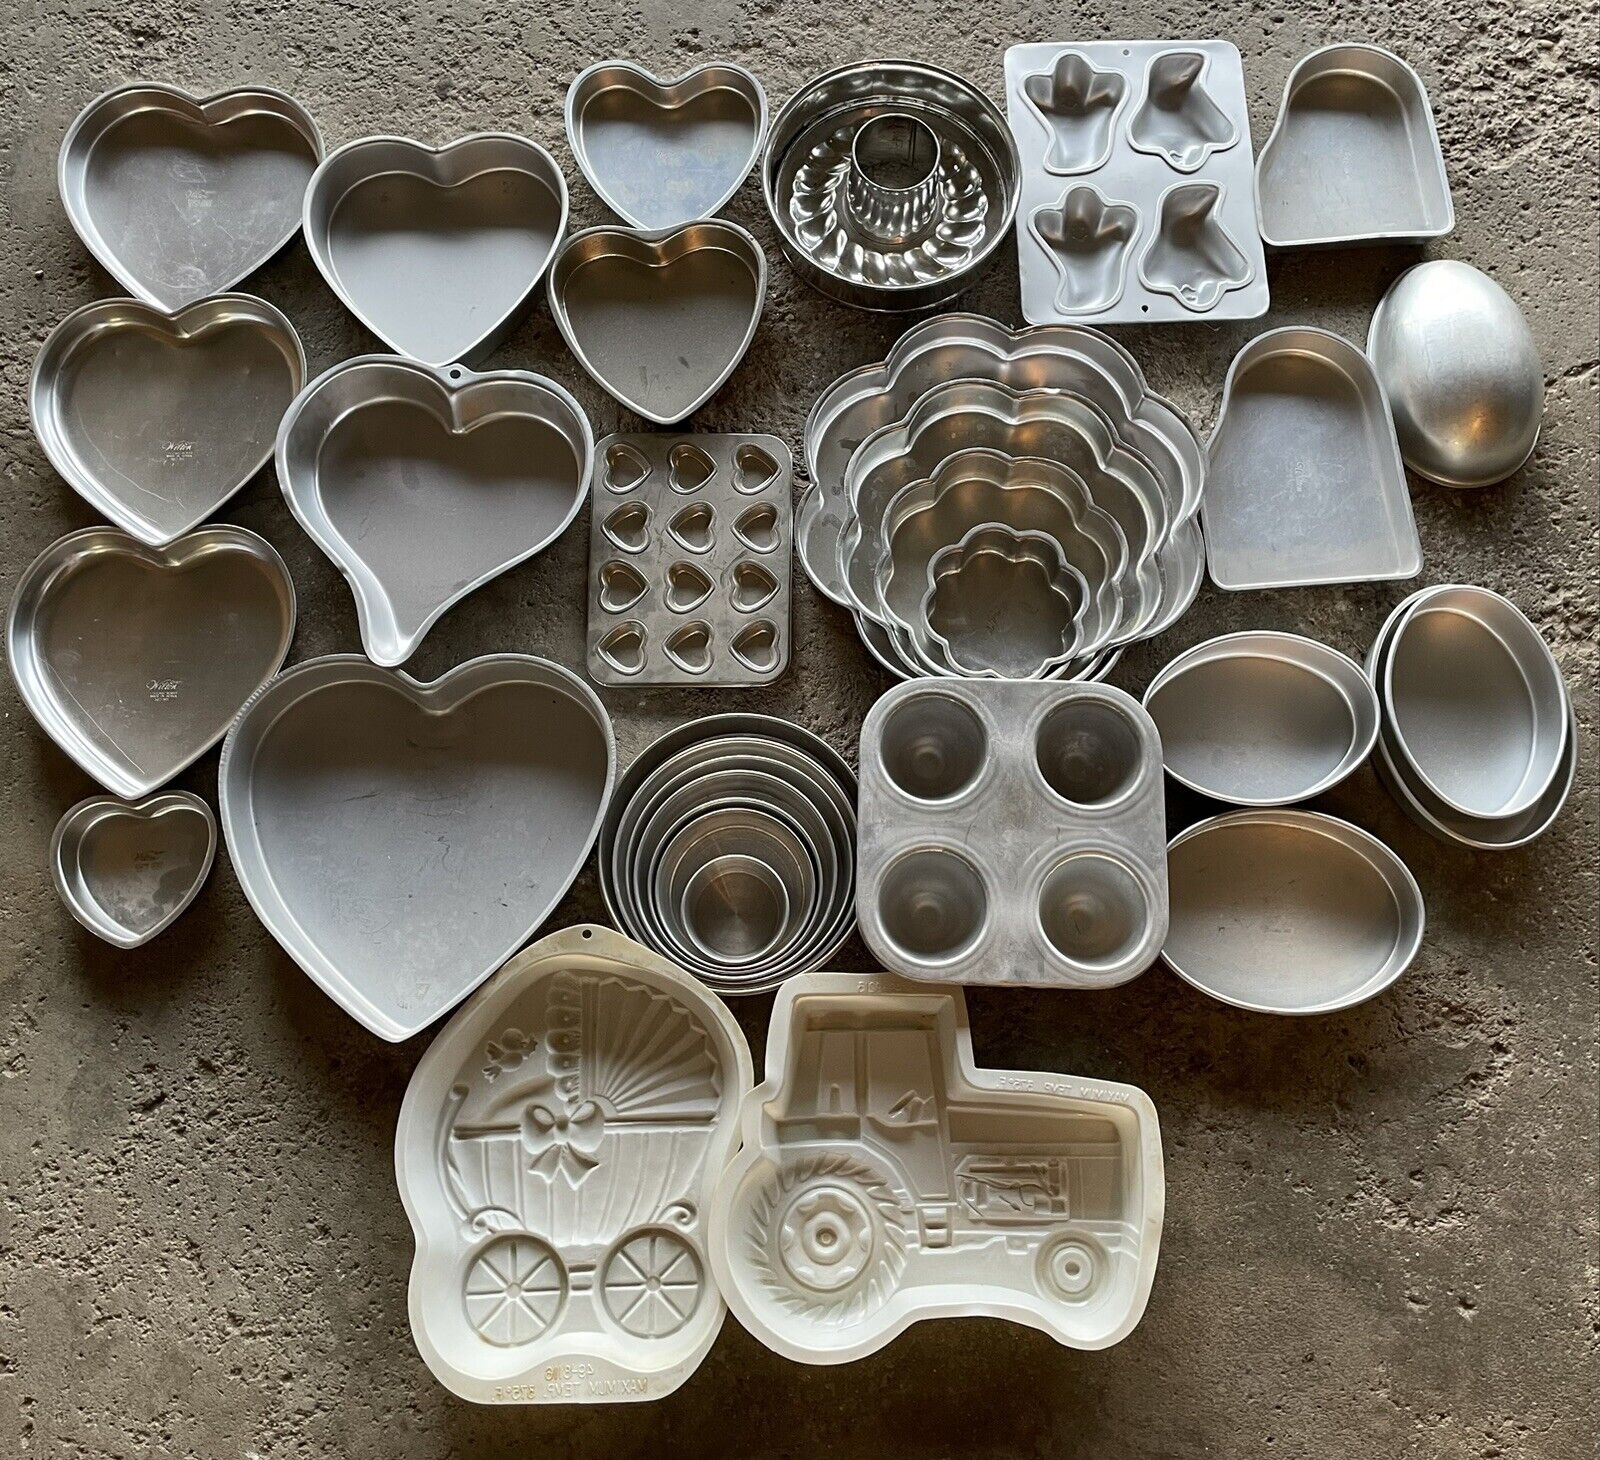 Huge Lot of Wilton Cake Pans And Other Pans